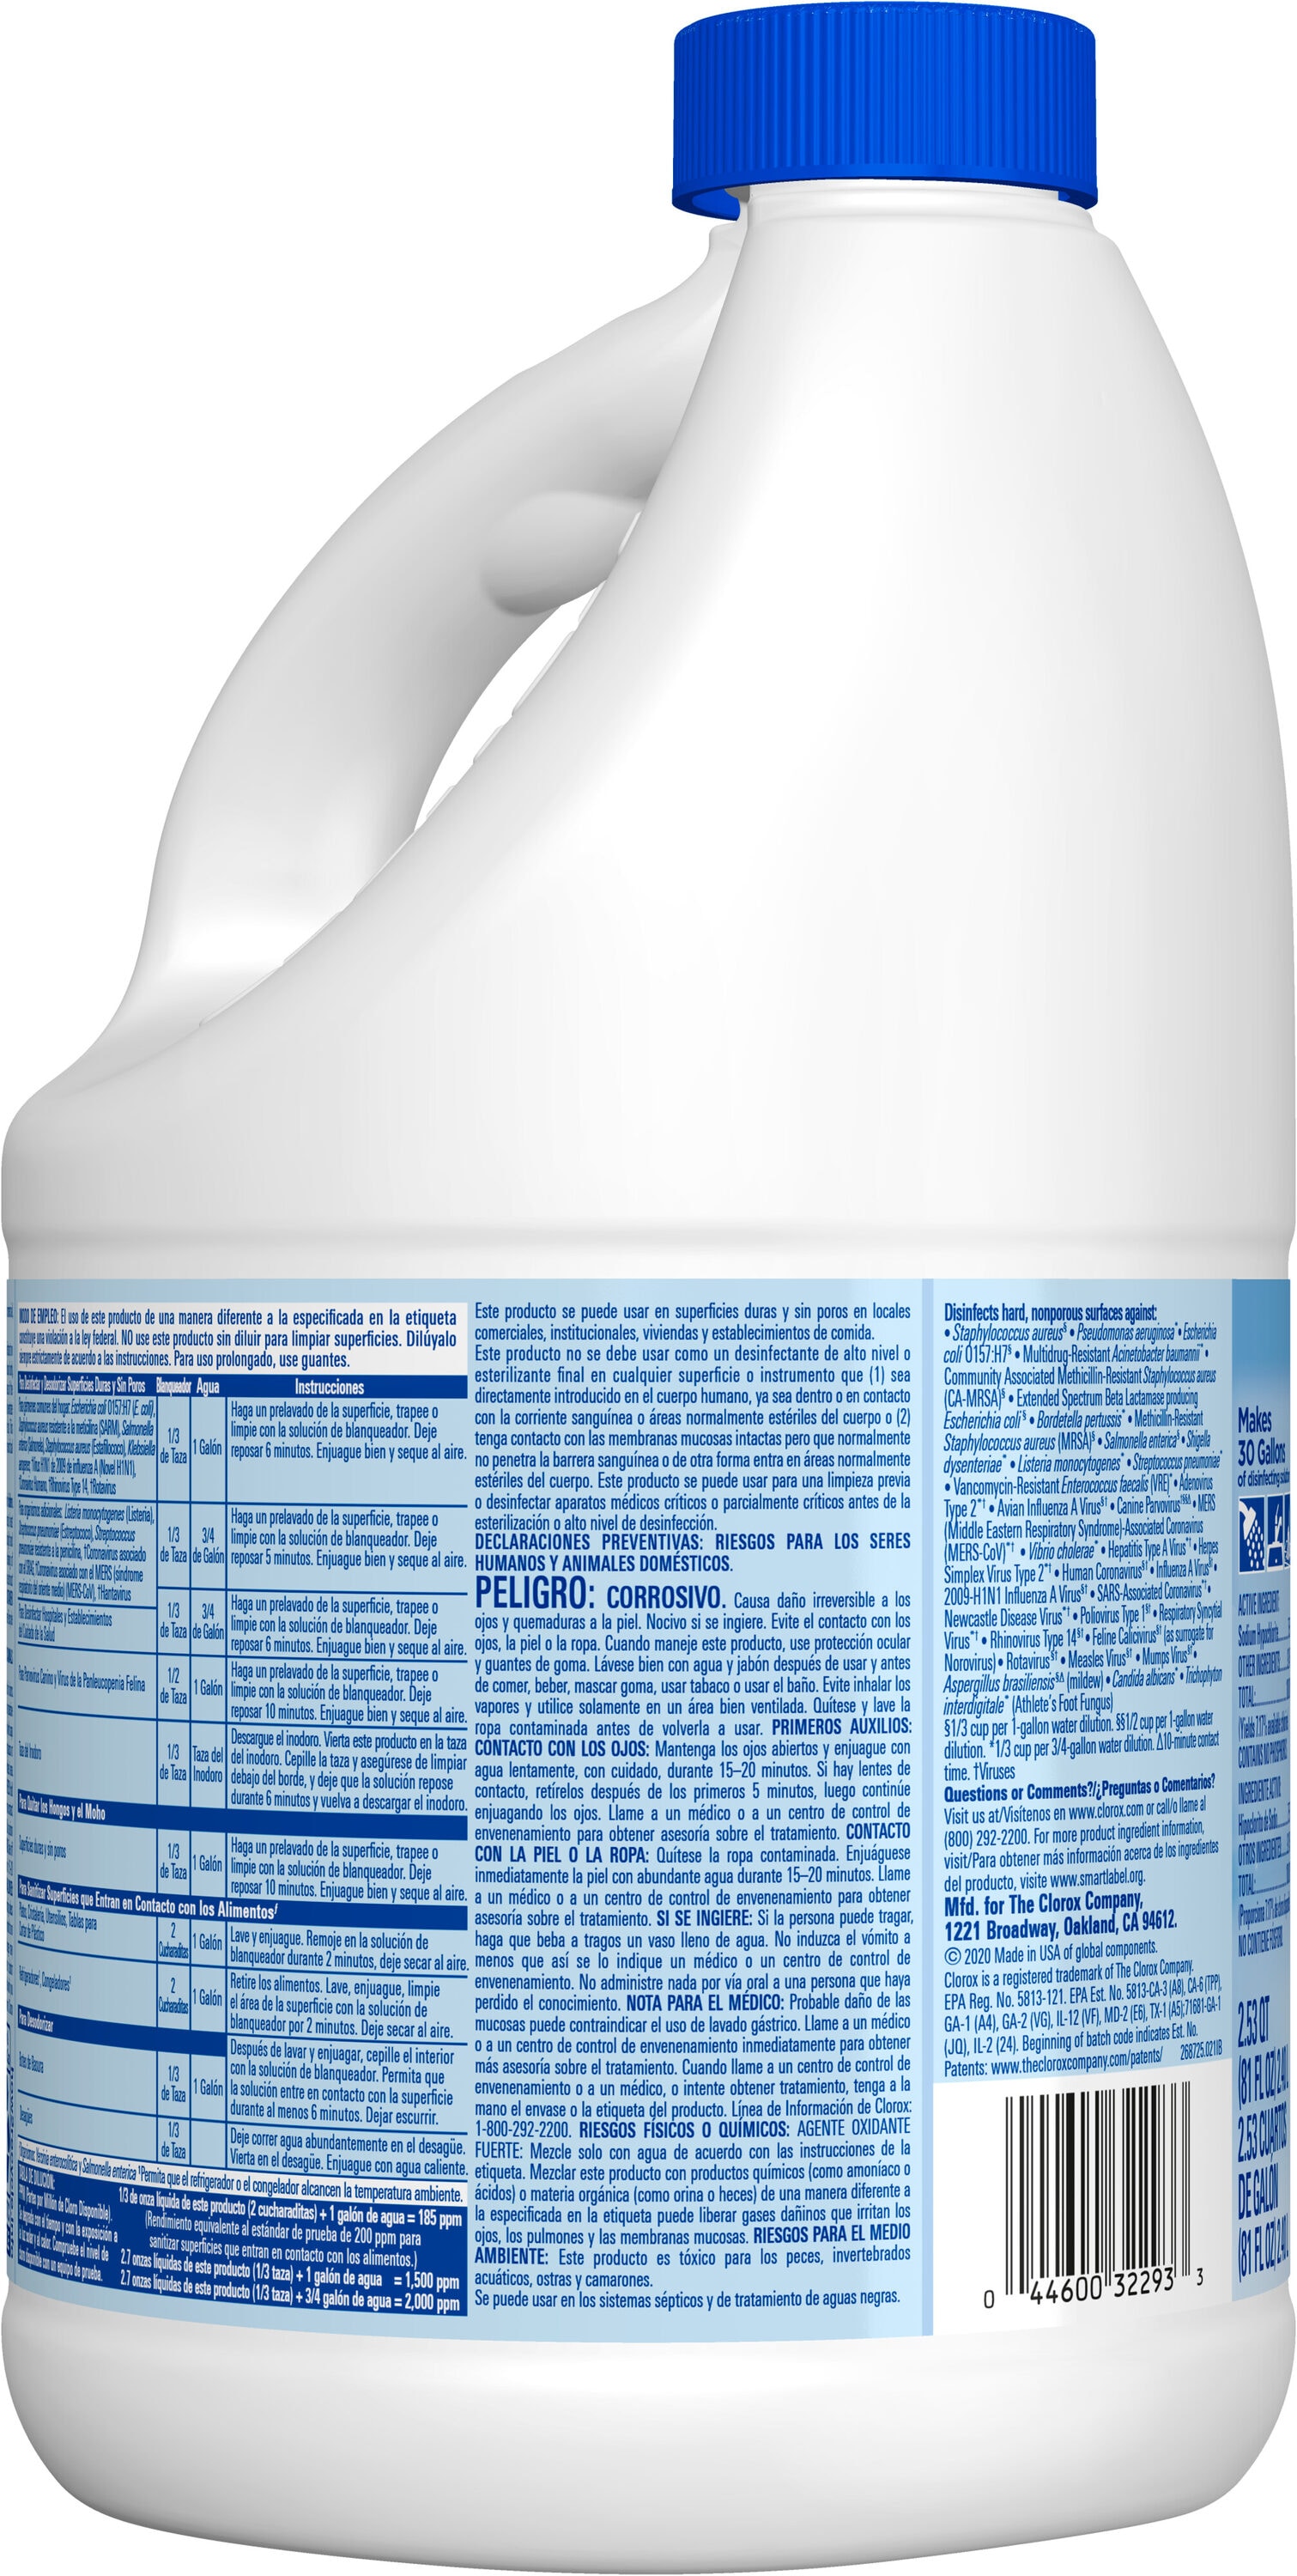 Clorox 81 Oz. Concentrated Germicidal Bleach - Power Townsend Company